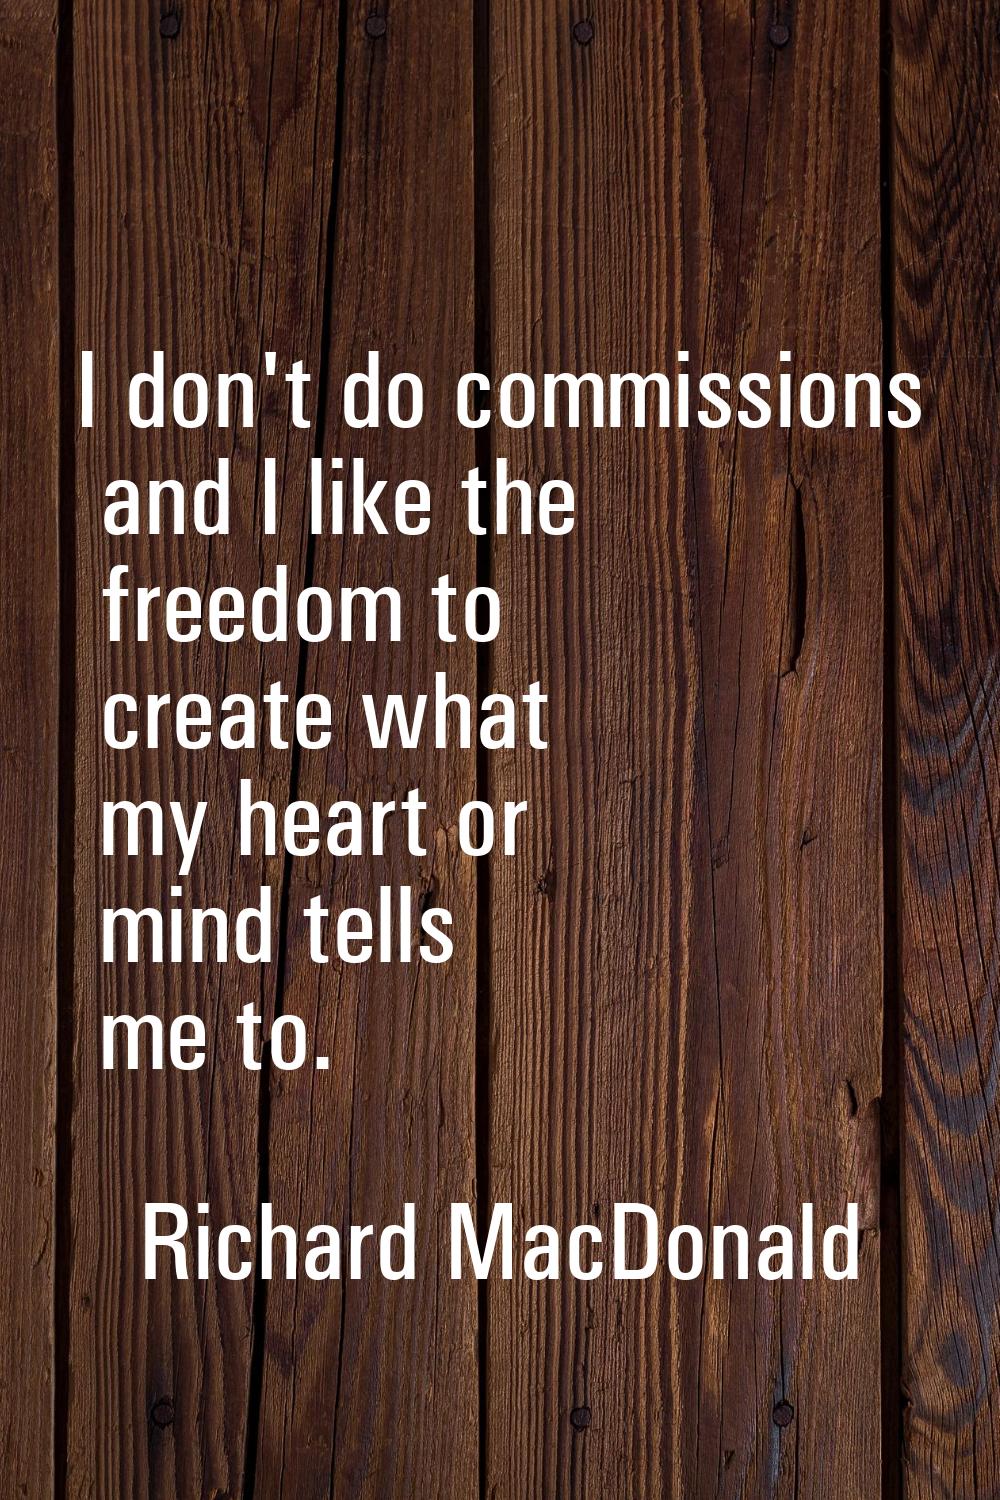 I don't do commissions and I like the freedom to create what my heart or mind tells me to.